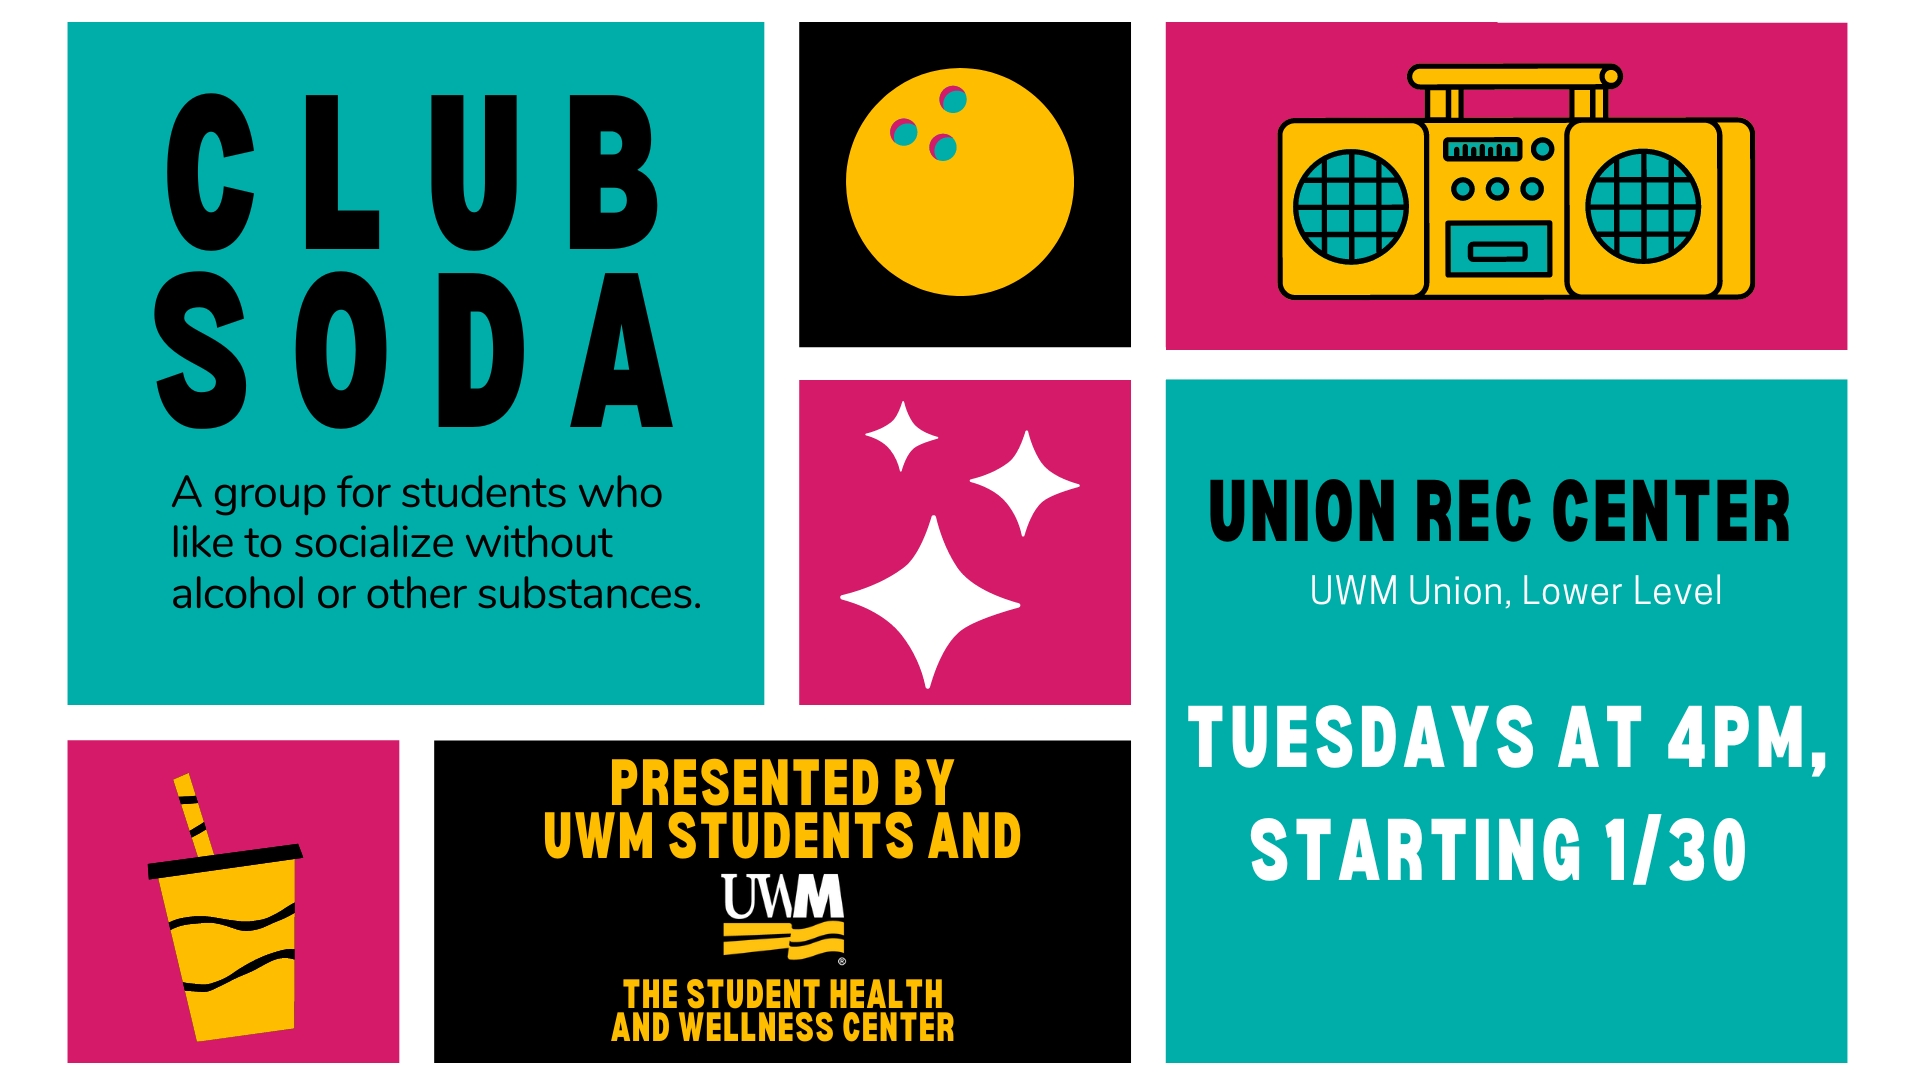 A graphic about sober social events in the union each Tuesday at 4 pm